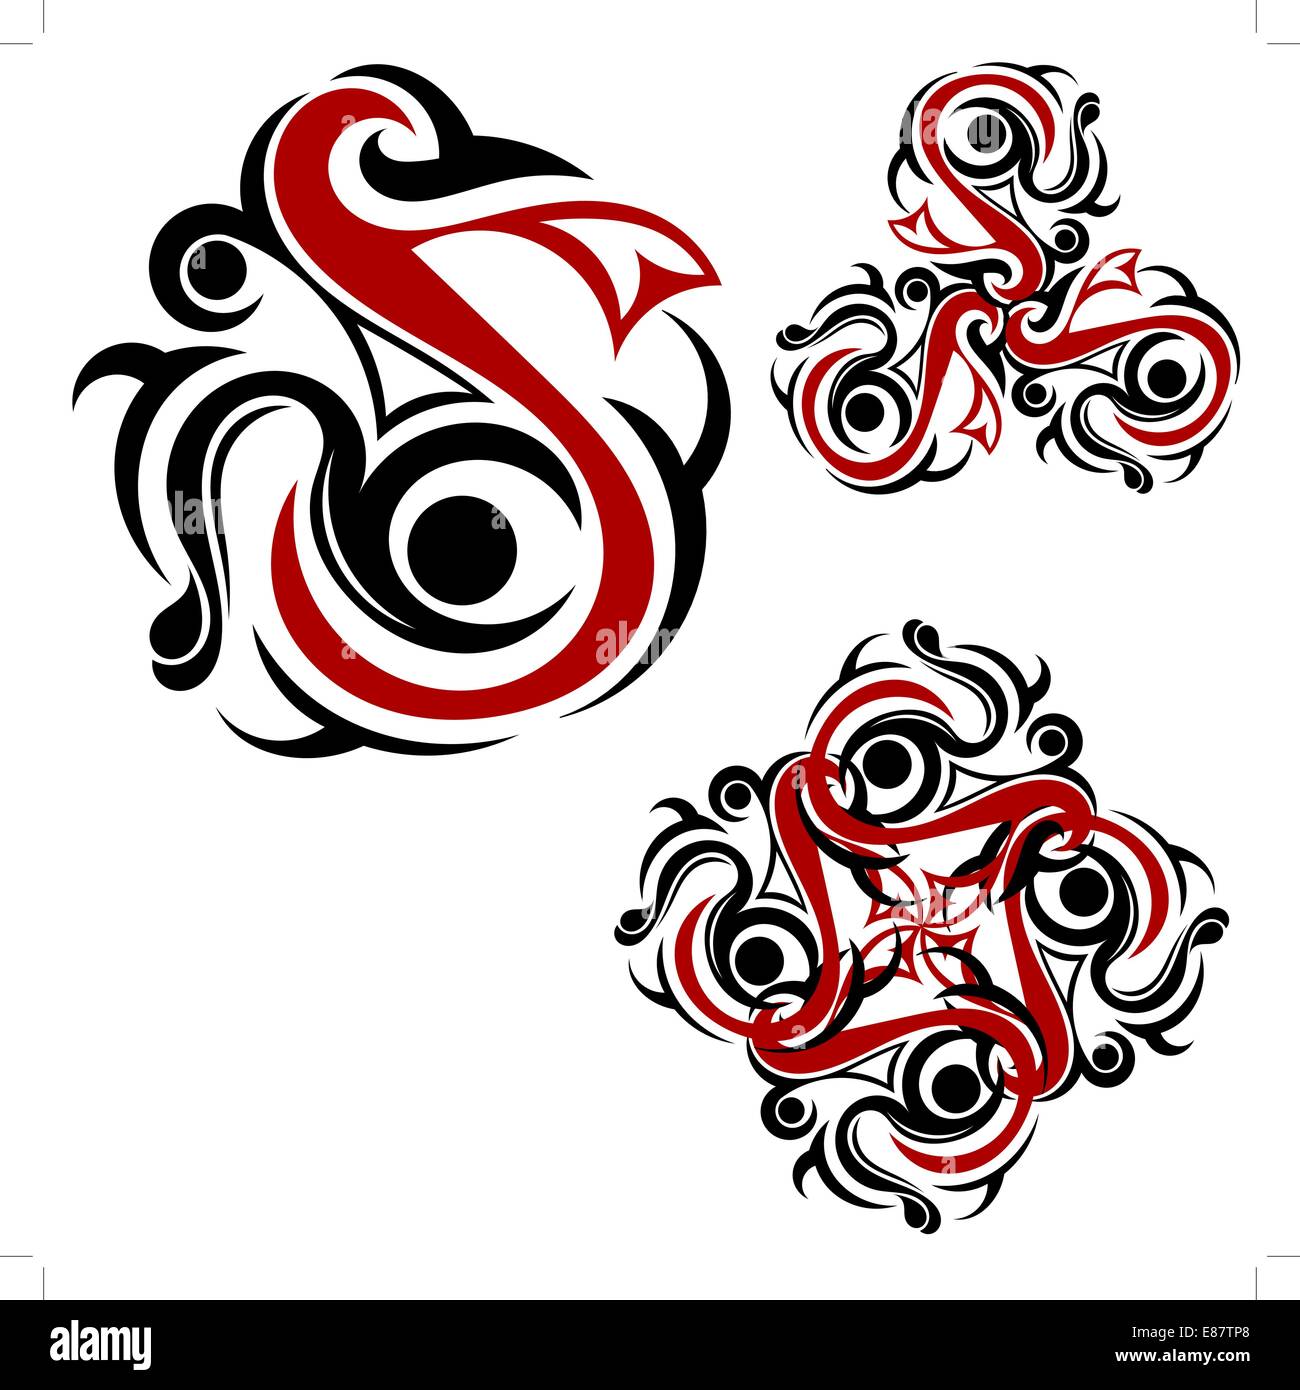 Tribal tattoo with red elements Stock Vector